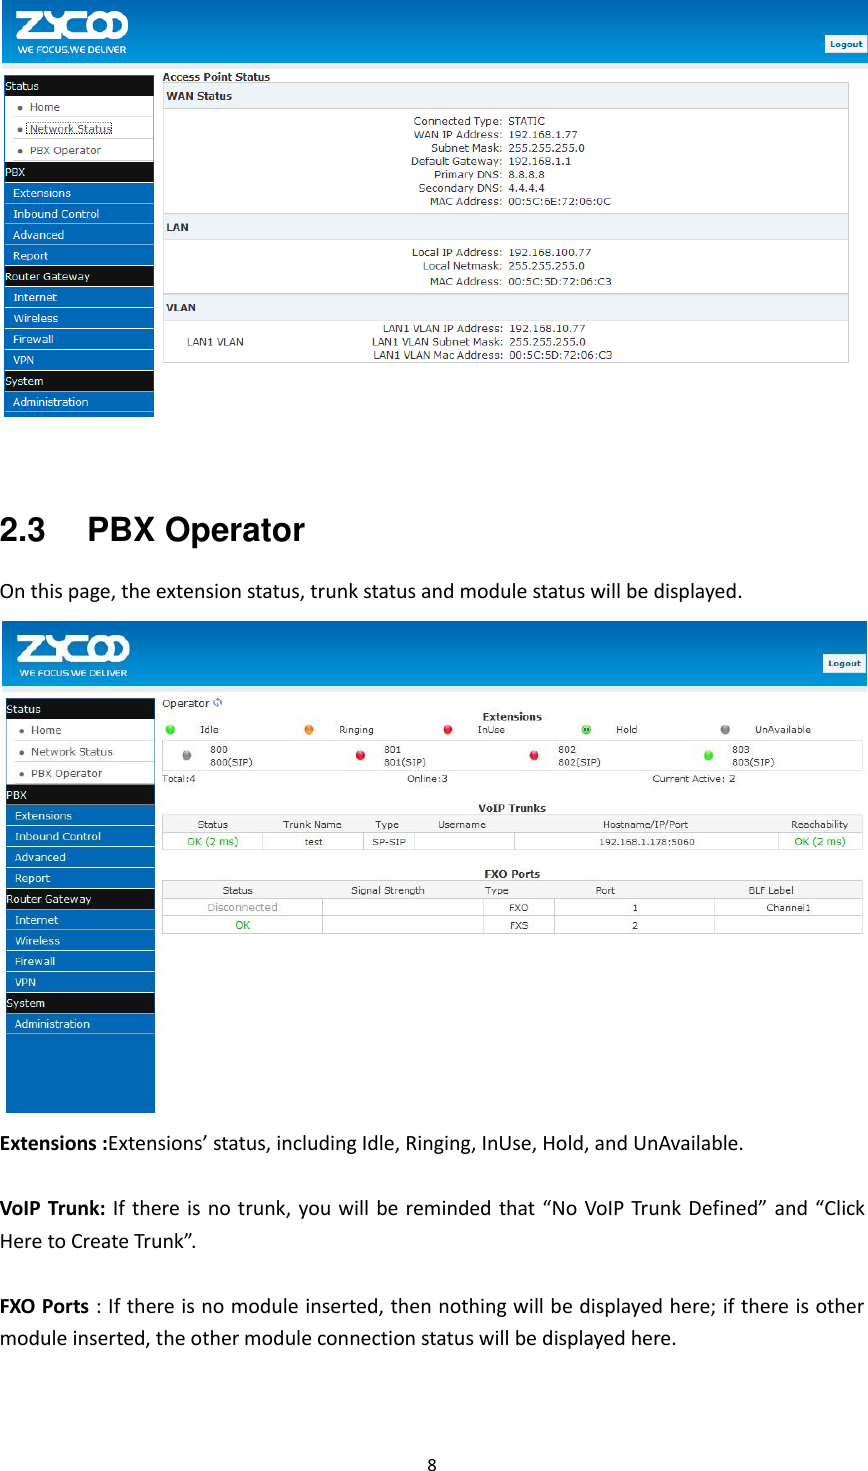  8     2.3  PBX Operator On this page, the extension status, trunk status and module status will be displayed.  Extensions :Extensions’ status, including Idle, Ringing, InUse, Hold, and UnAvailable.  VoIP Trunk:  If there is no trunk, you will  be reminded that “No  VoIP Trunk Defined” and “Click Here to Create Trunk”.  FXO Ports : If there is no module inserted, then nothing will be displayed here; if there is other module inserted, the other module connection status will be displayed here.  